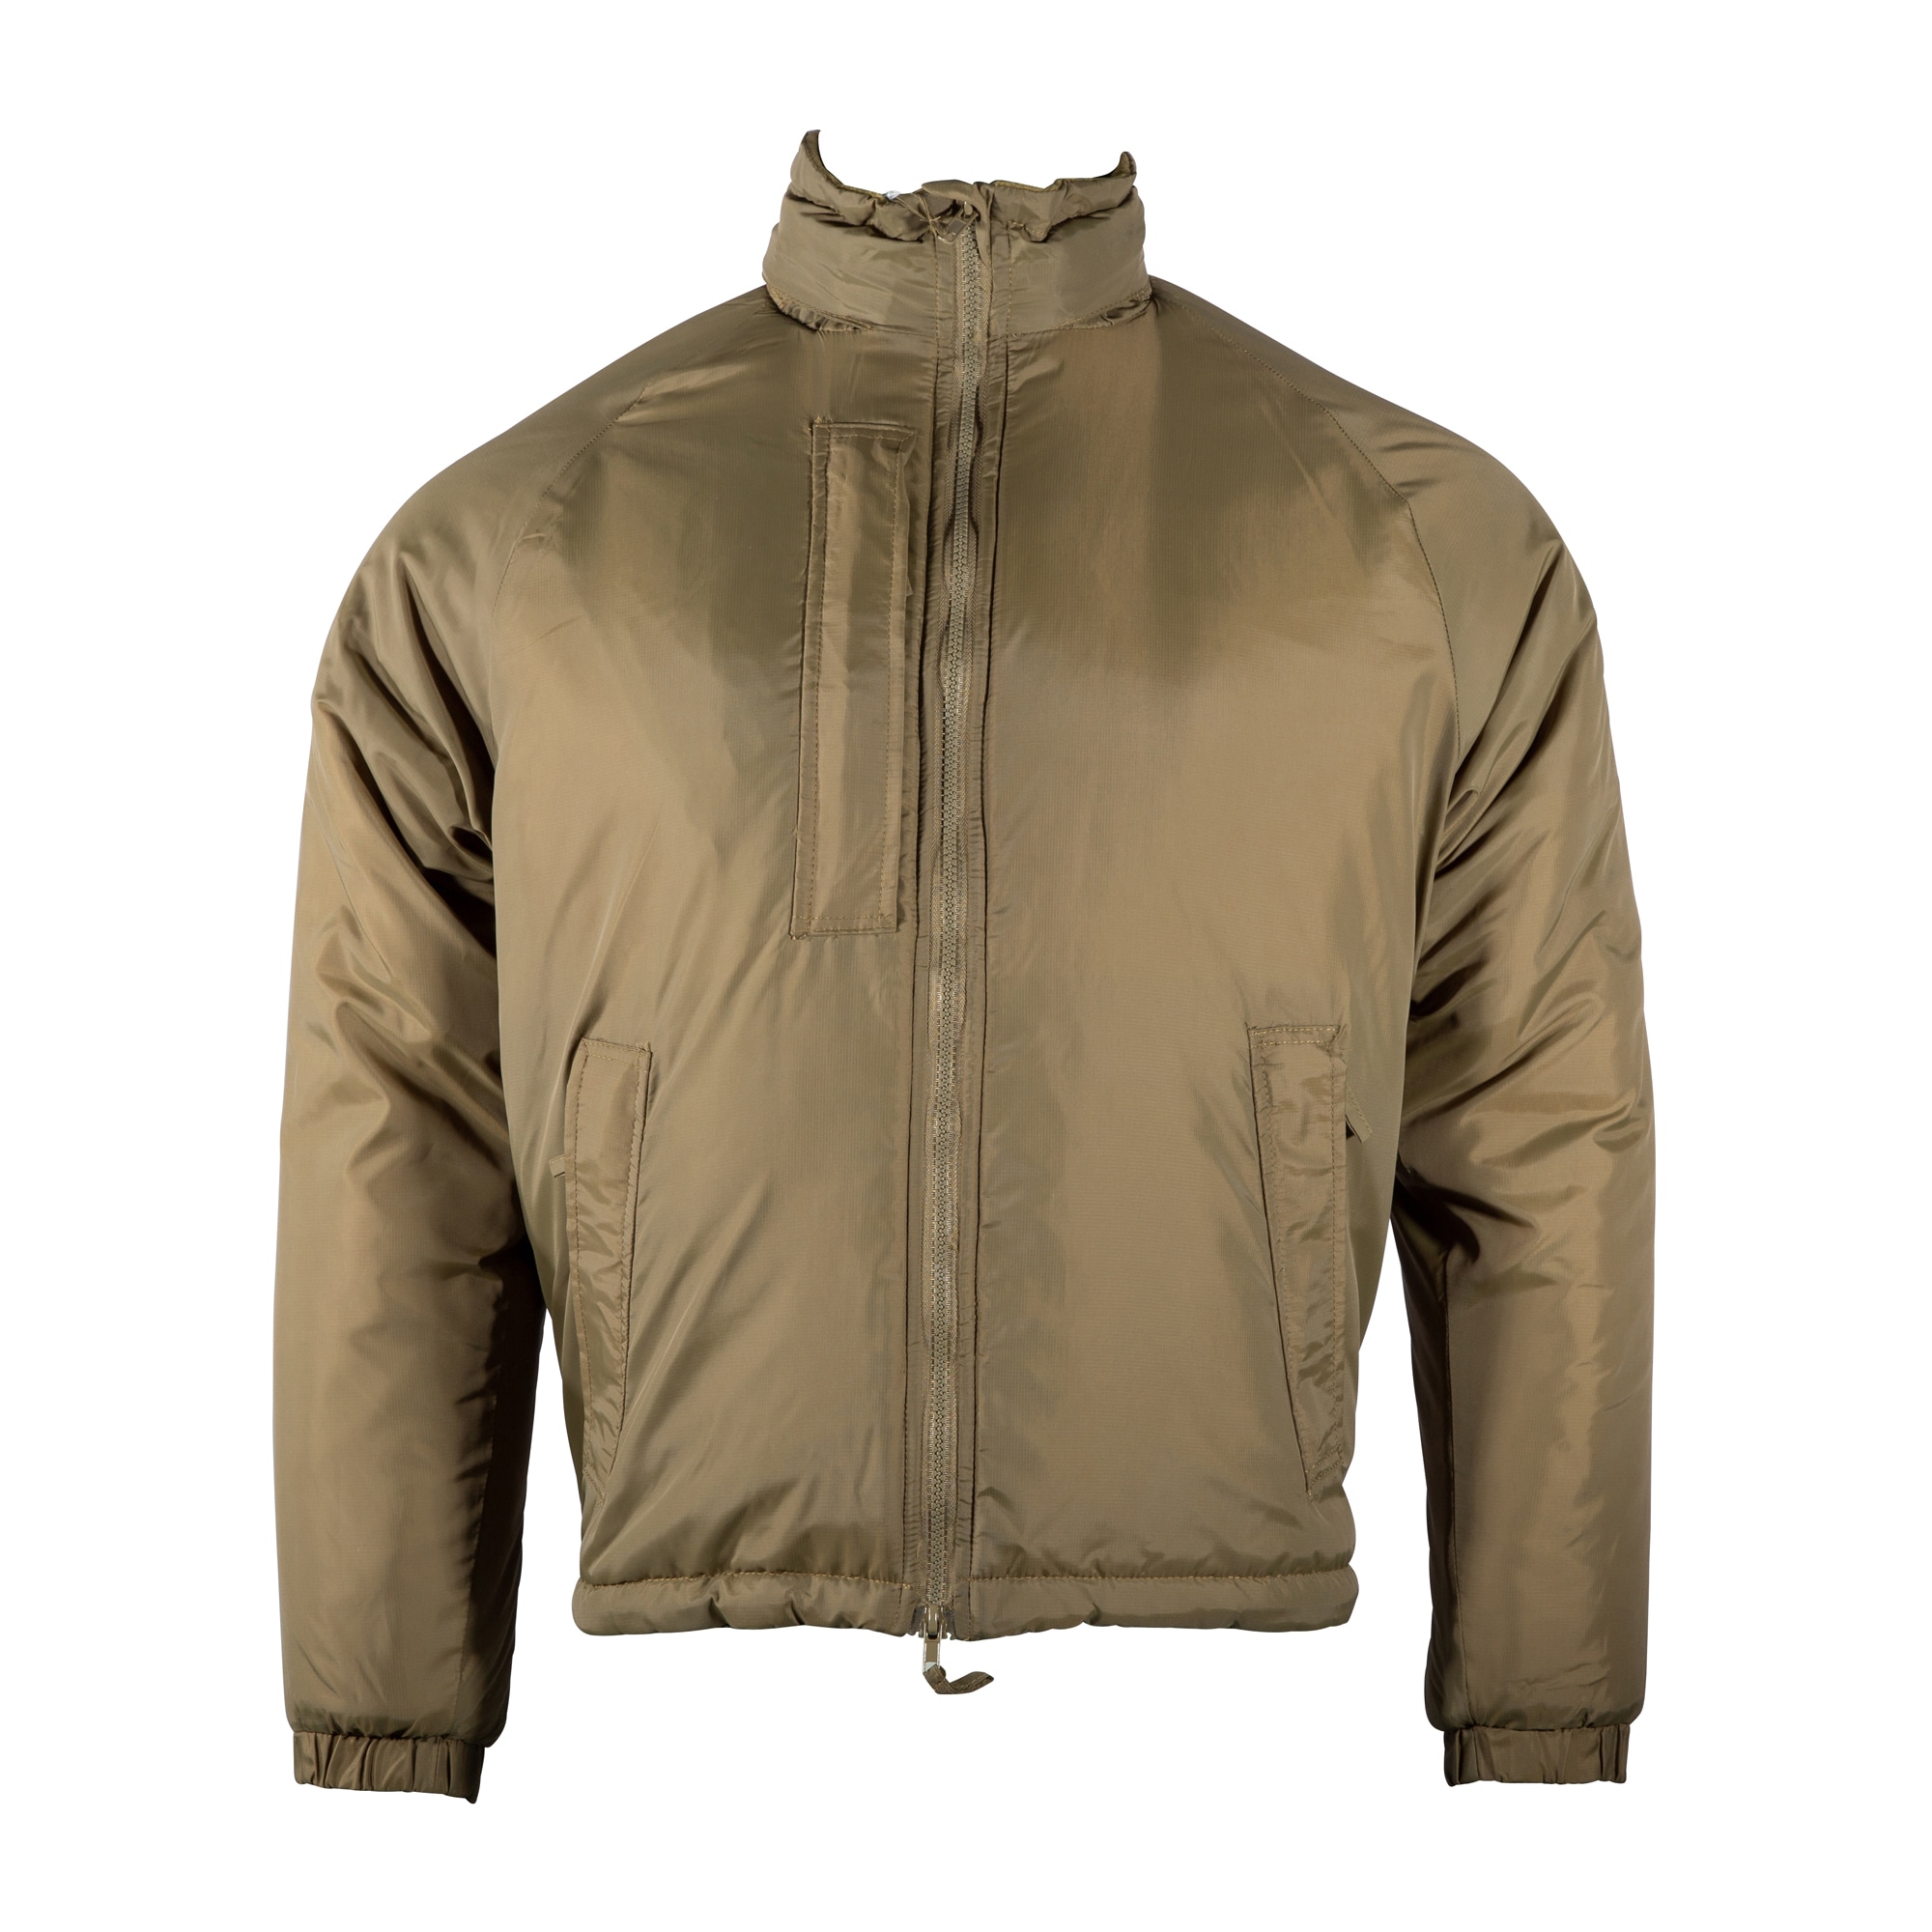 Purchase the MFH British Thermal Jacket olive by SMC